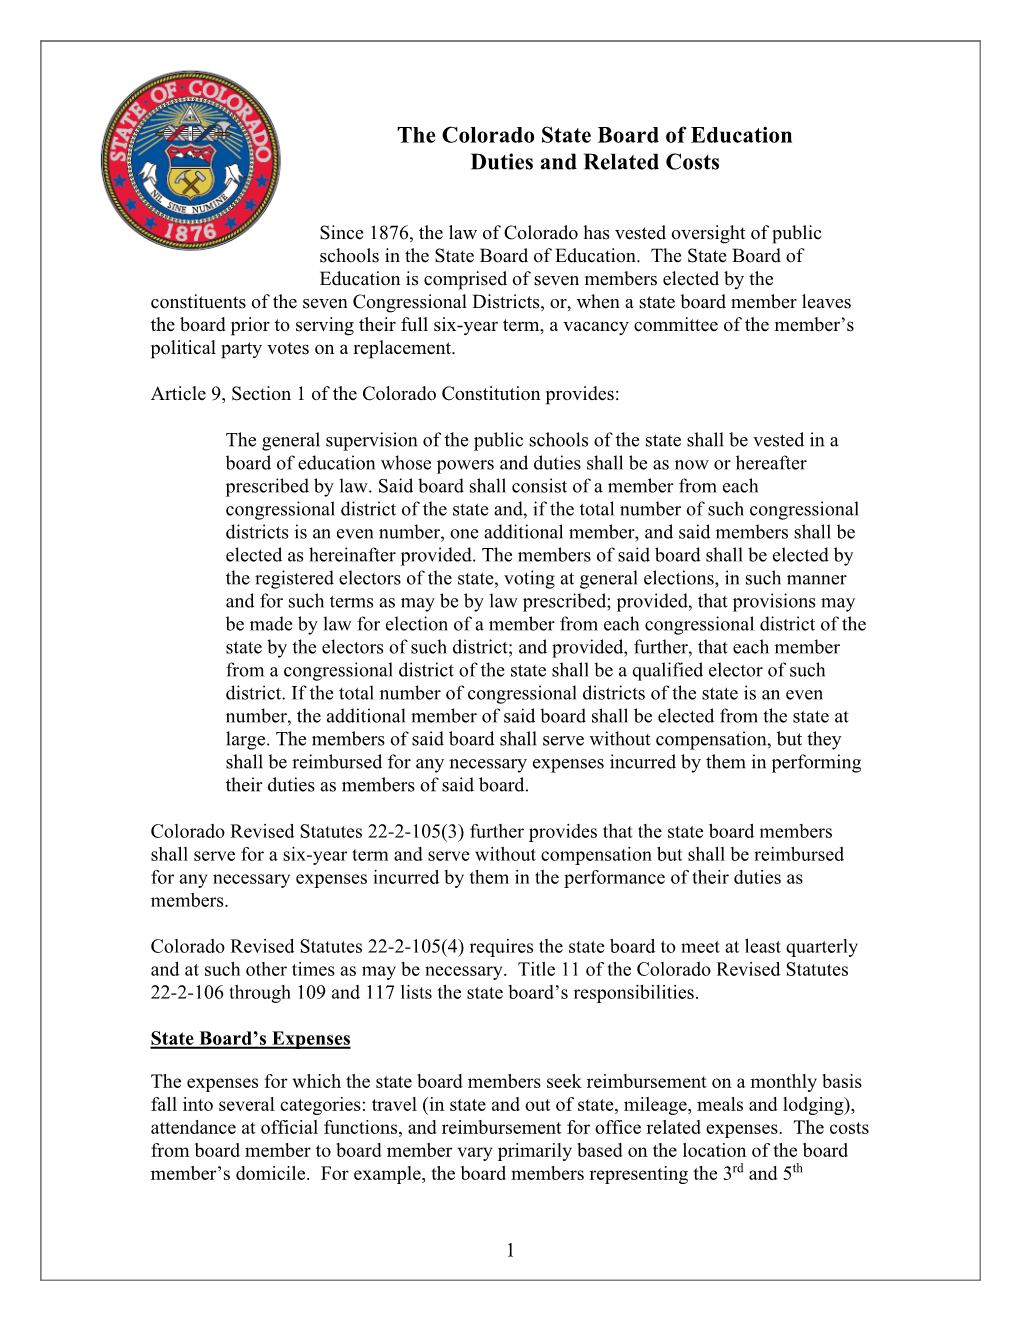 The Colorado State Board of Education Duties and Related Costs